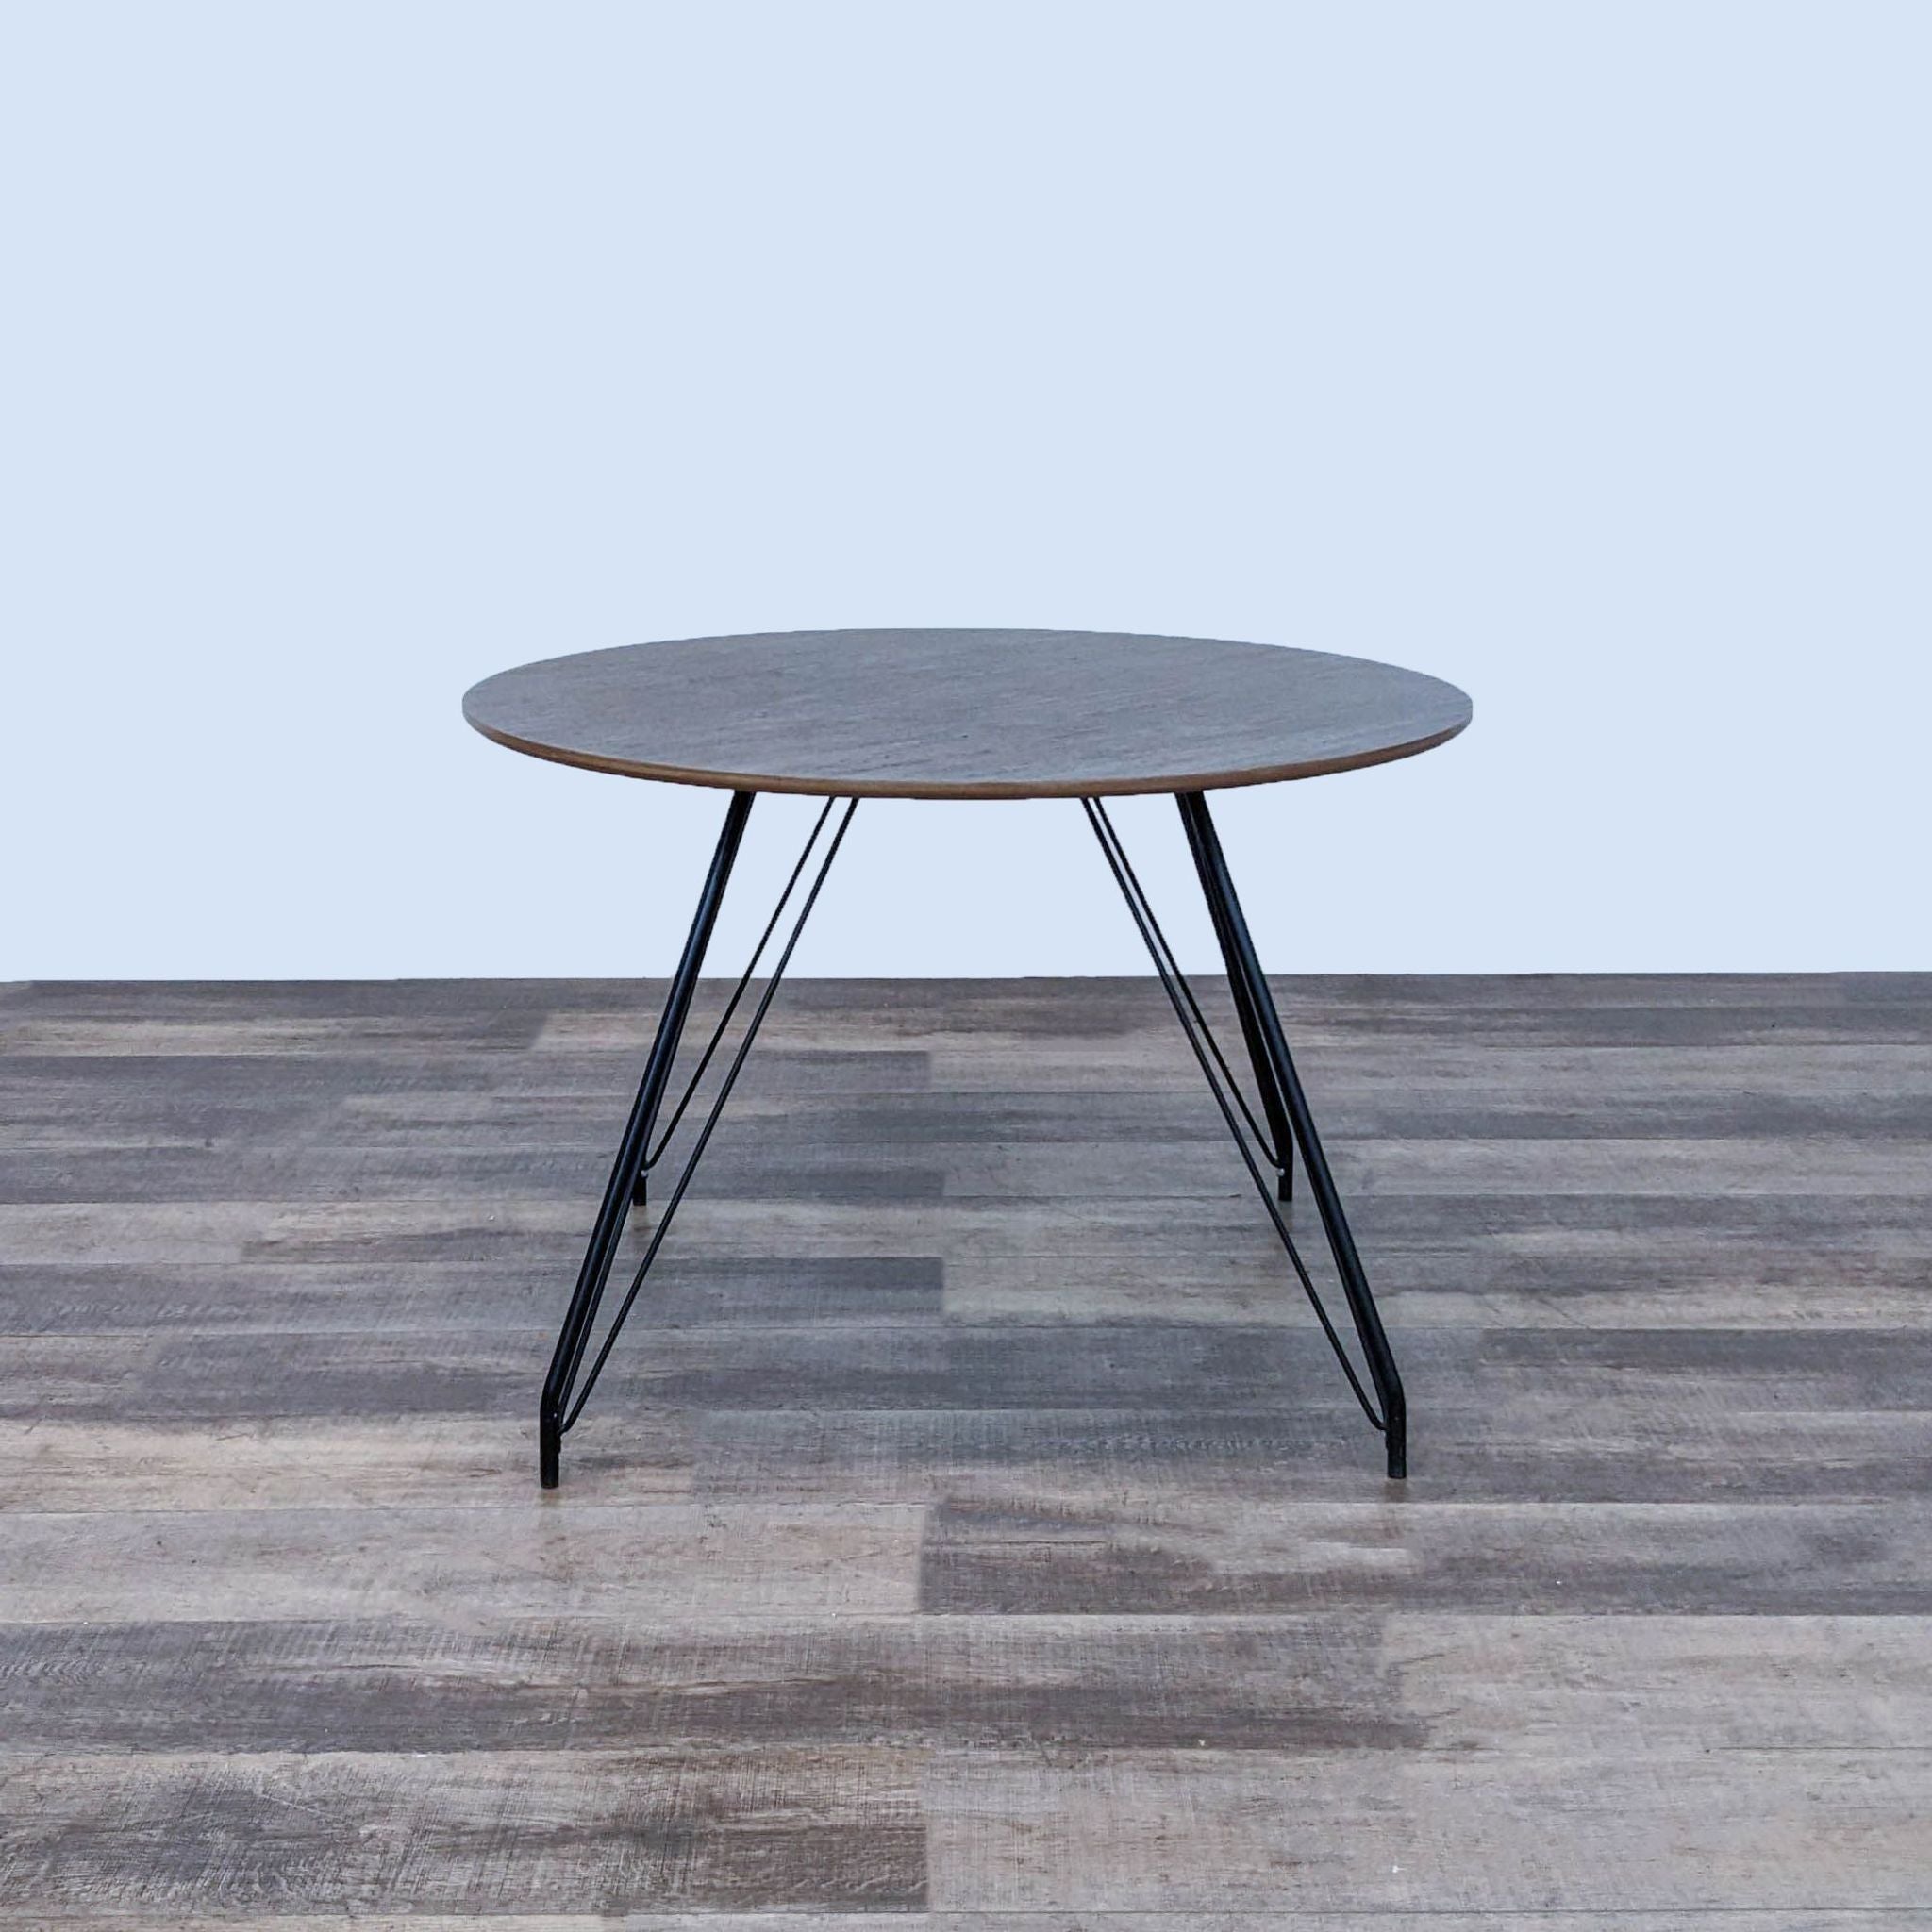 1. Round Satellite dining table by Modway with a wood grain veneer MDF top and black steel hairpin legs on a wooden floor.